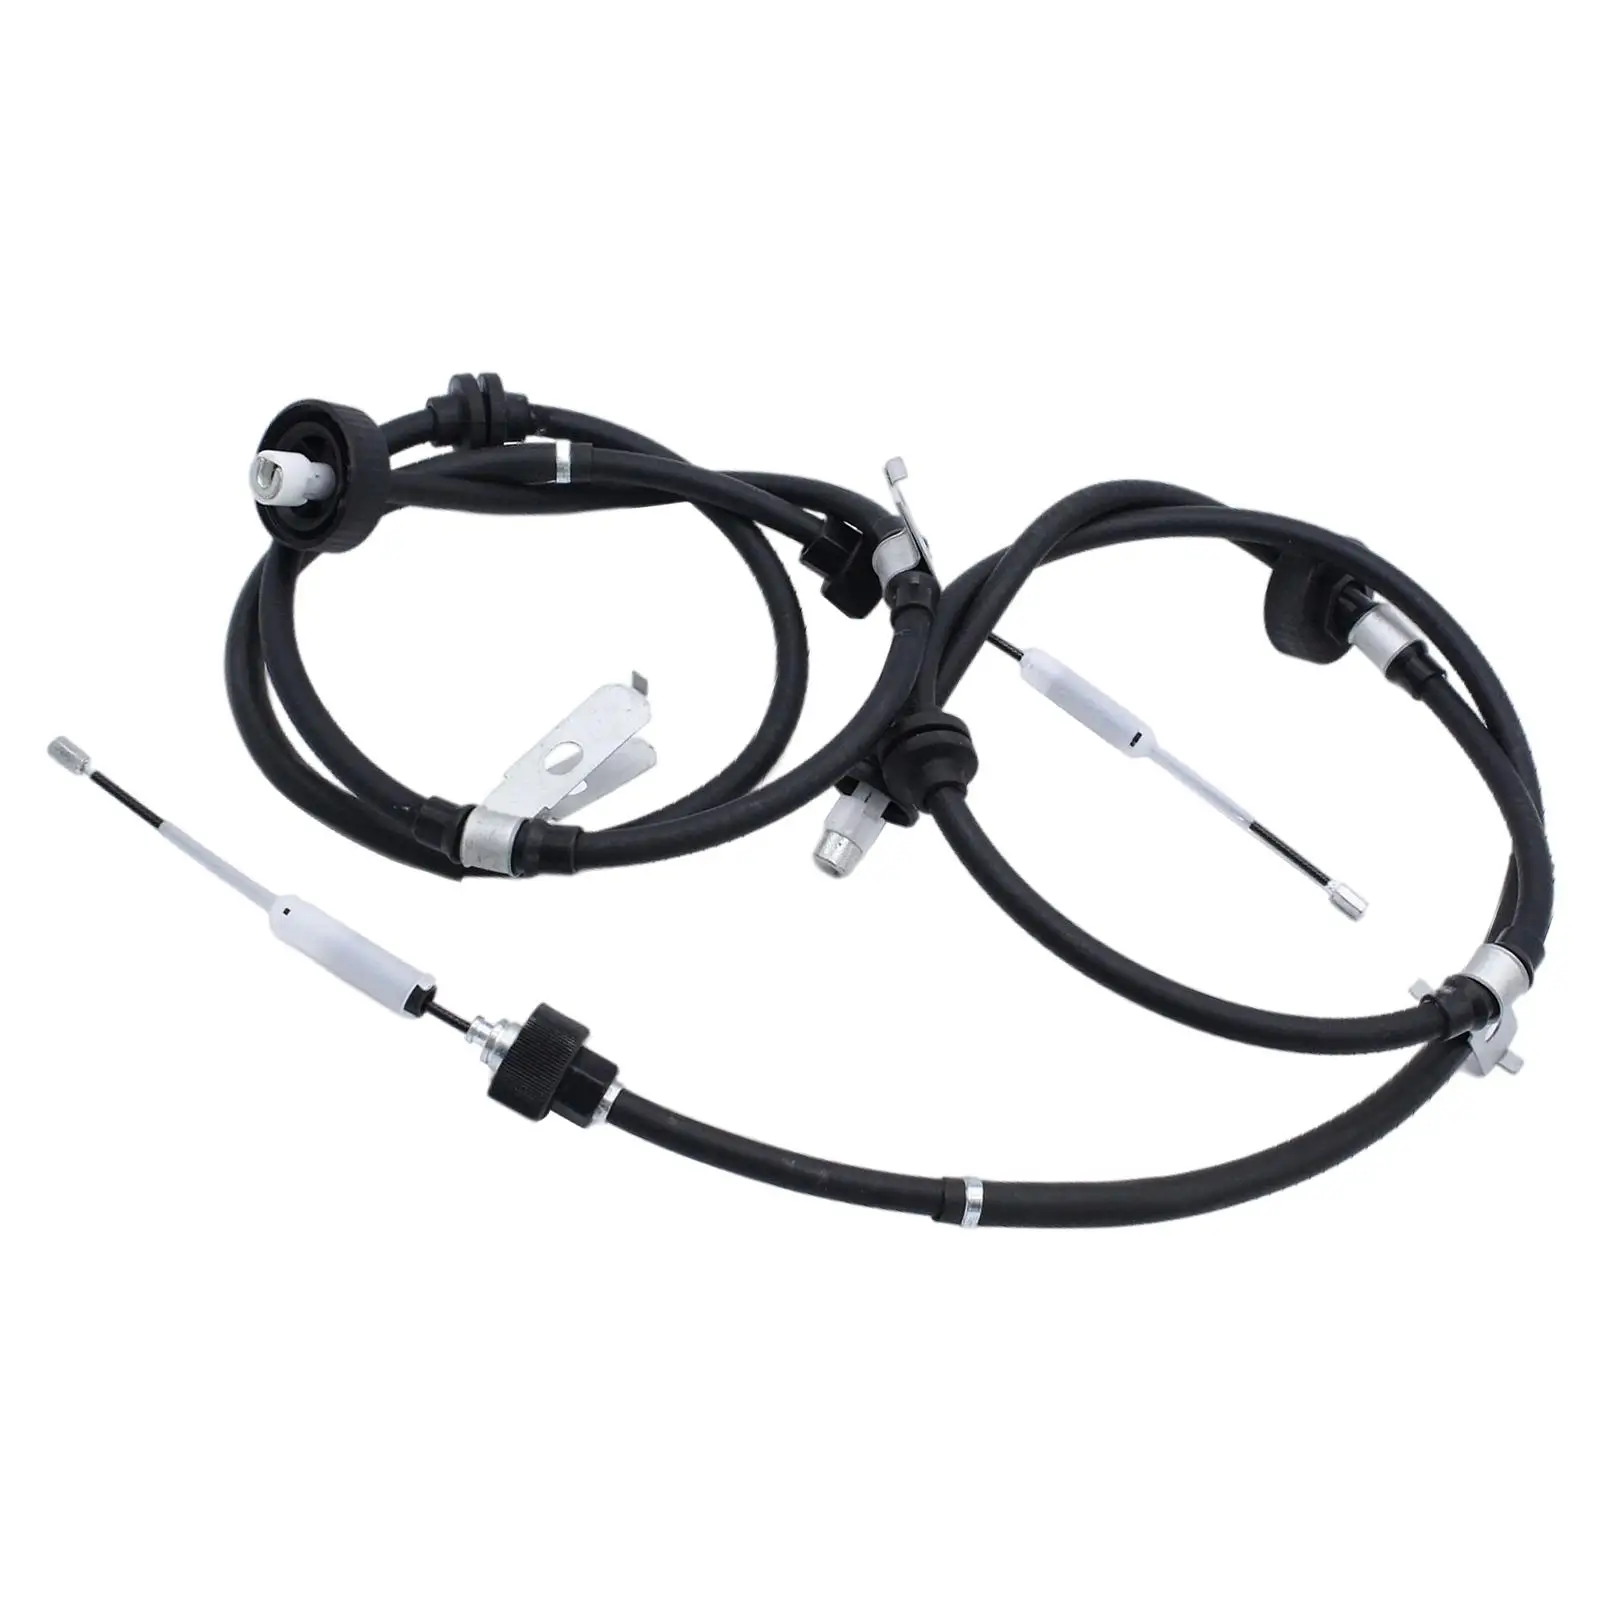 Brake Cable LR018470 2Pcs Fit for Discovery 04-17 Direct Replaces Accessories Easy to Install